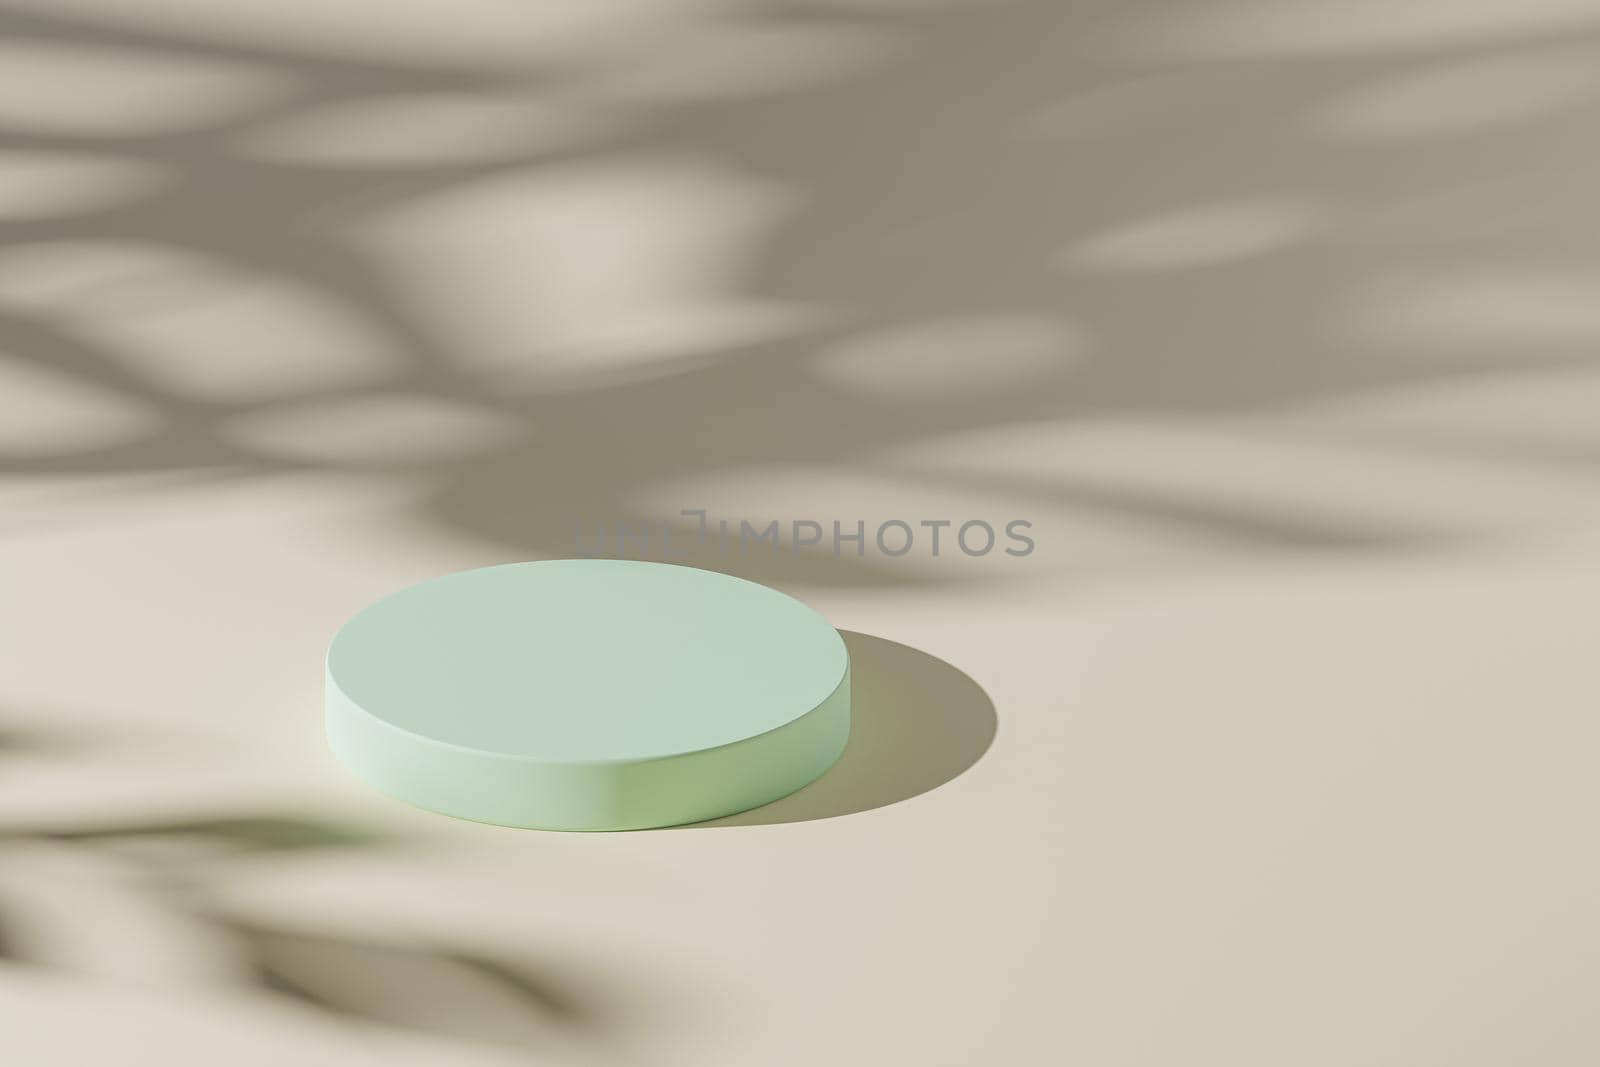 Beige pastel cylinder podium or pedestal for products or advertising with monstera leaves shadow. 3D rendering in minimal style.